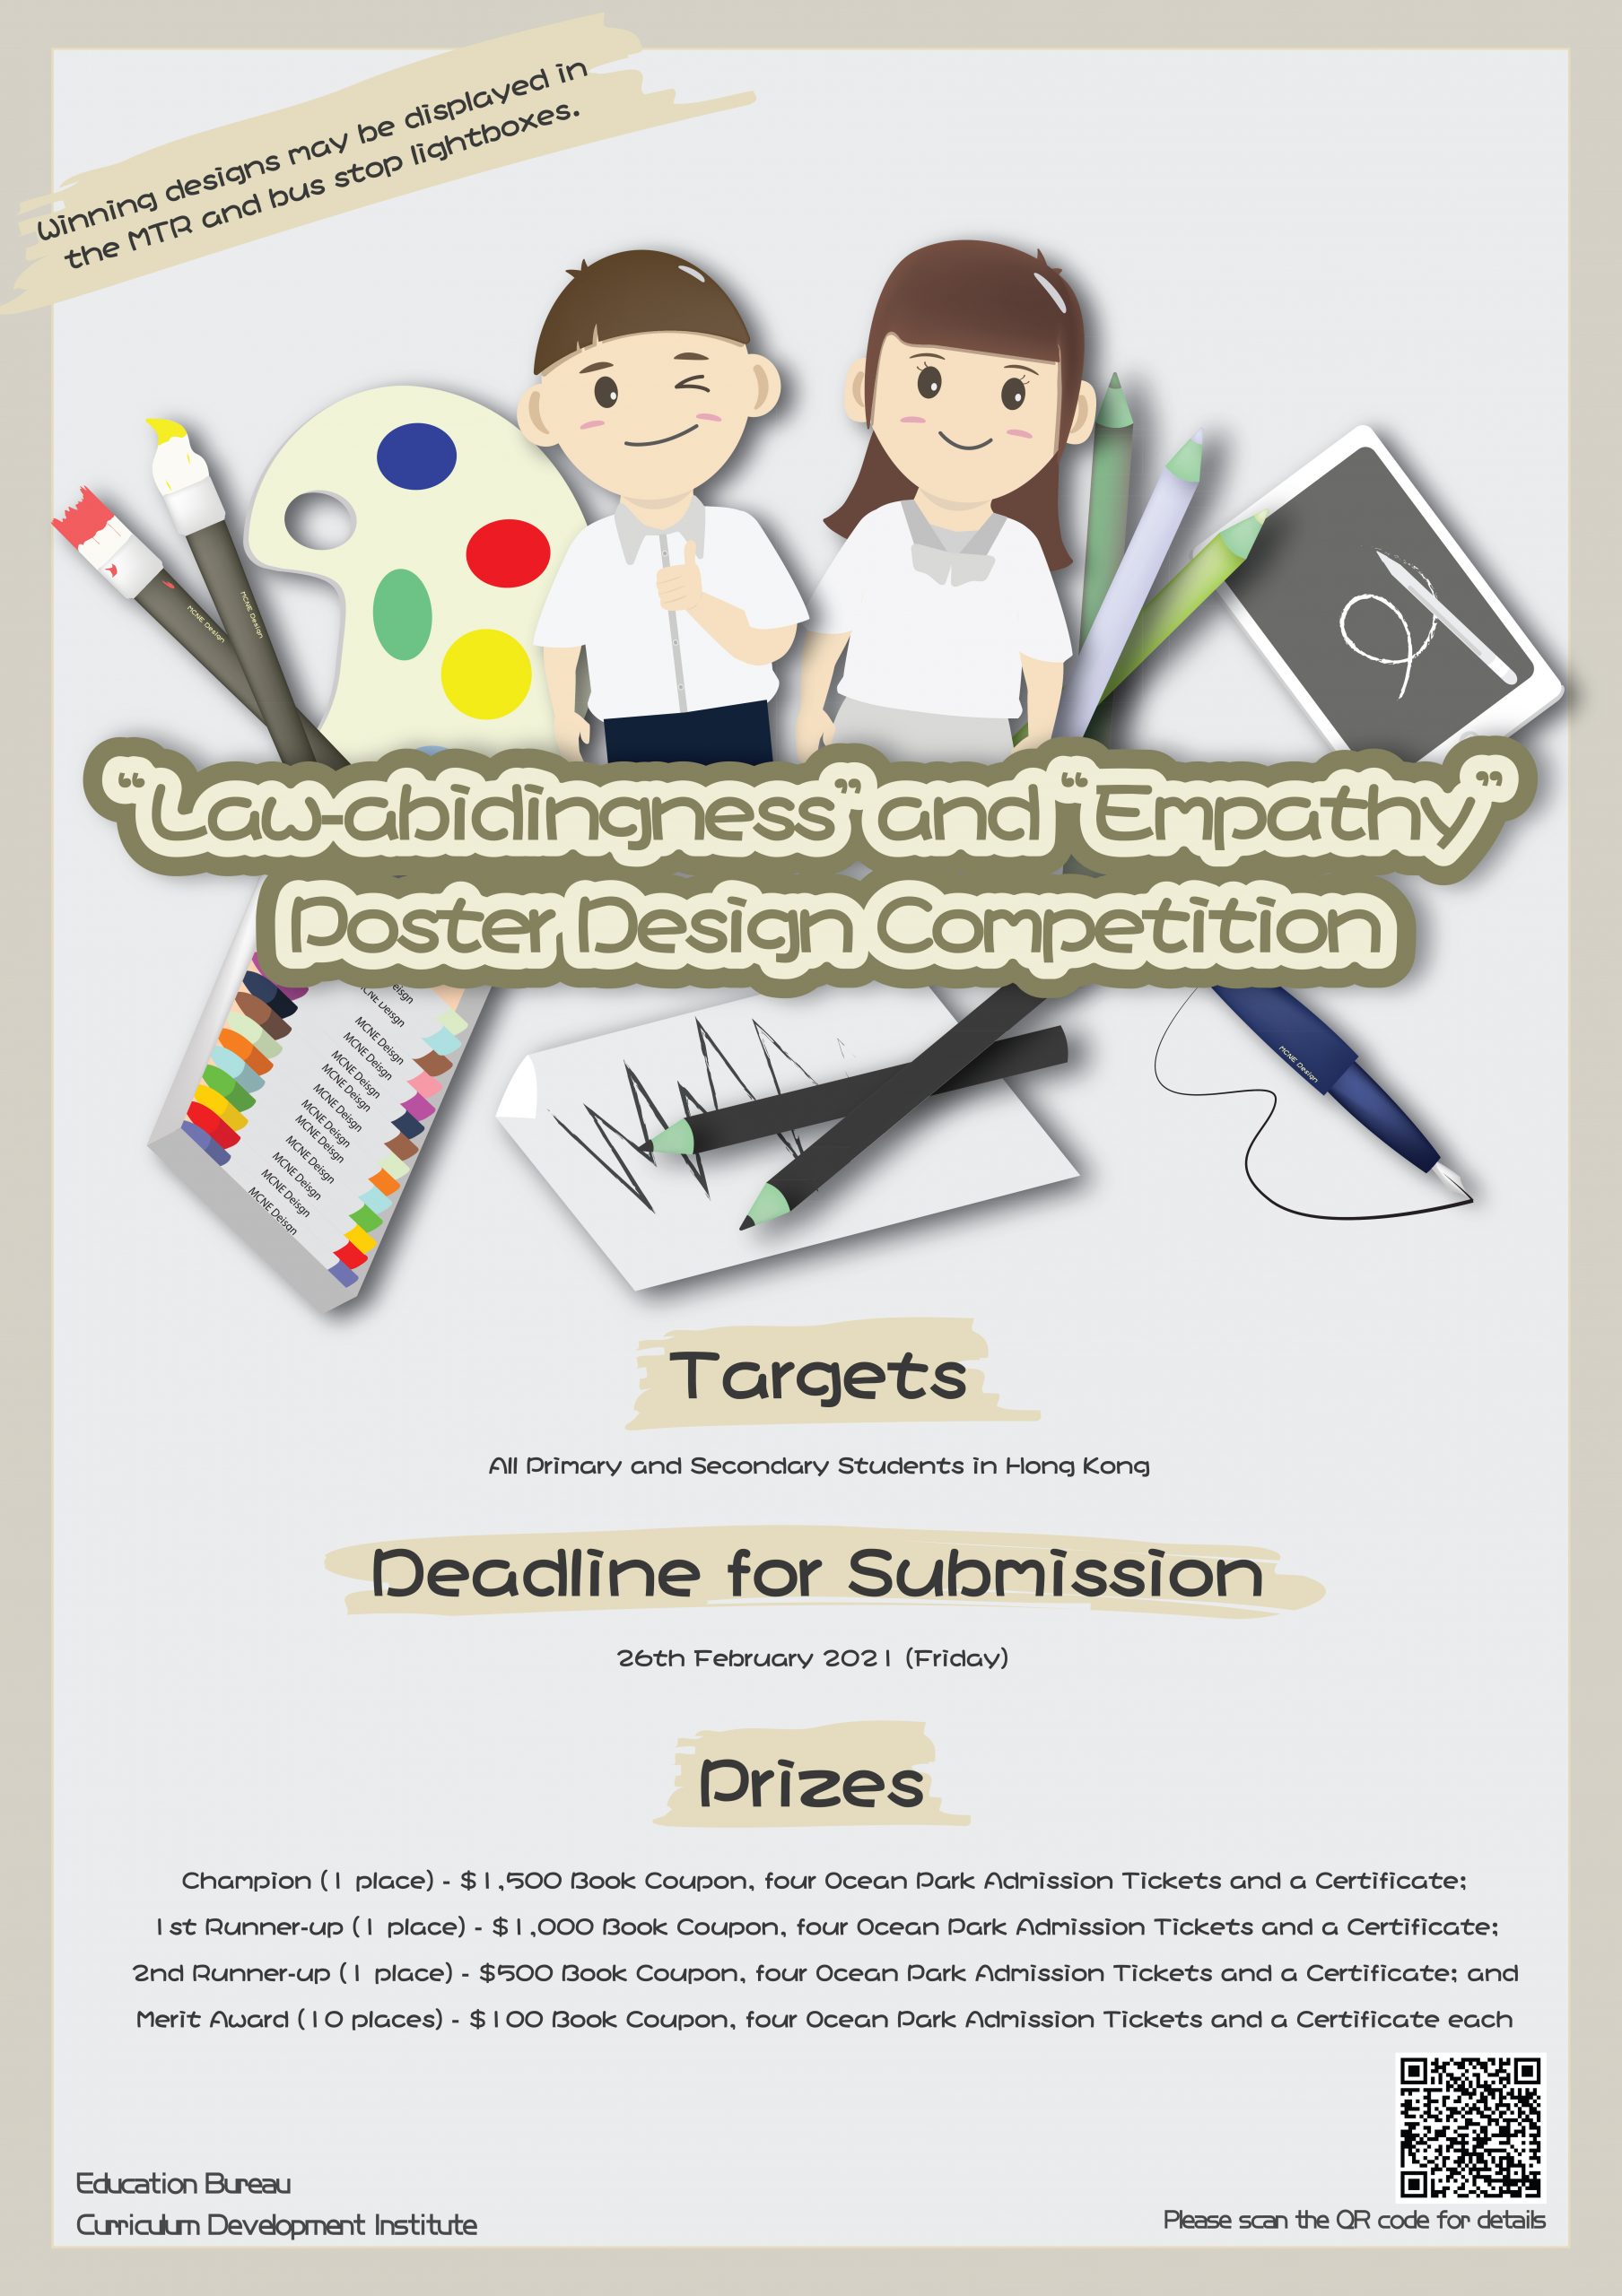 Actief Origineel vloeiend Law-abidingness” and “Empathy” Poster Design Competition 2020/21 -  e-Gallery | Celebrating Our Students' Success in pursuing whole-person  development